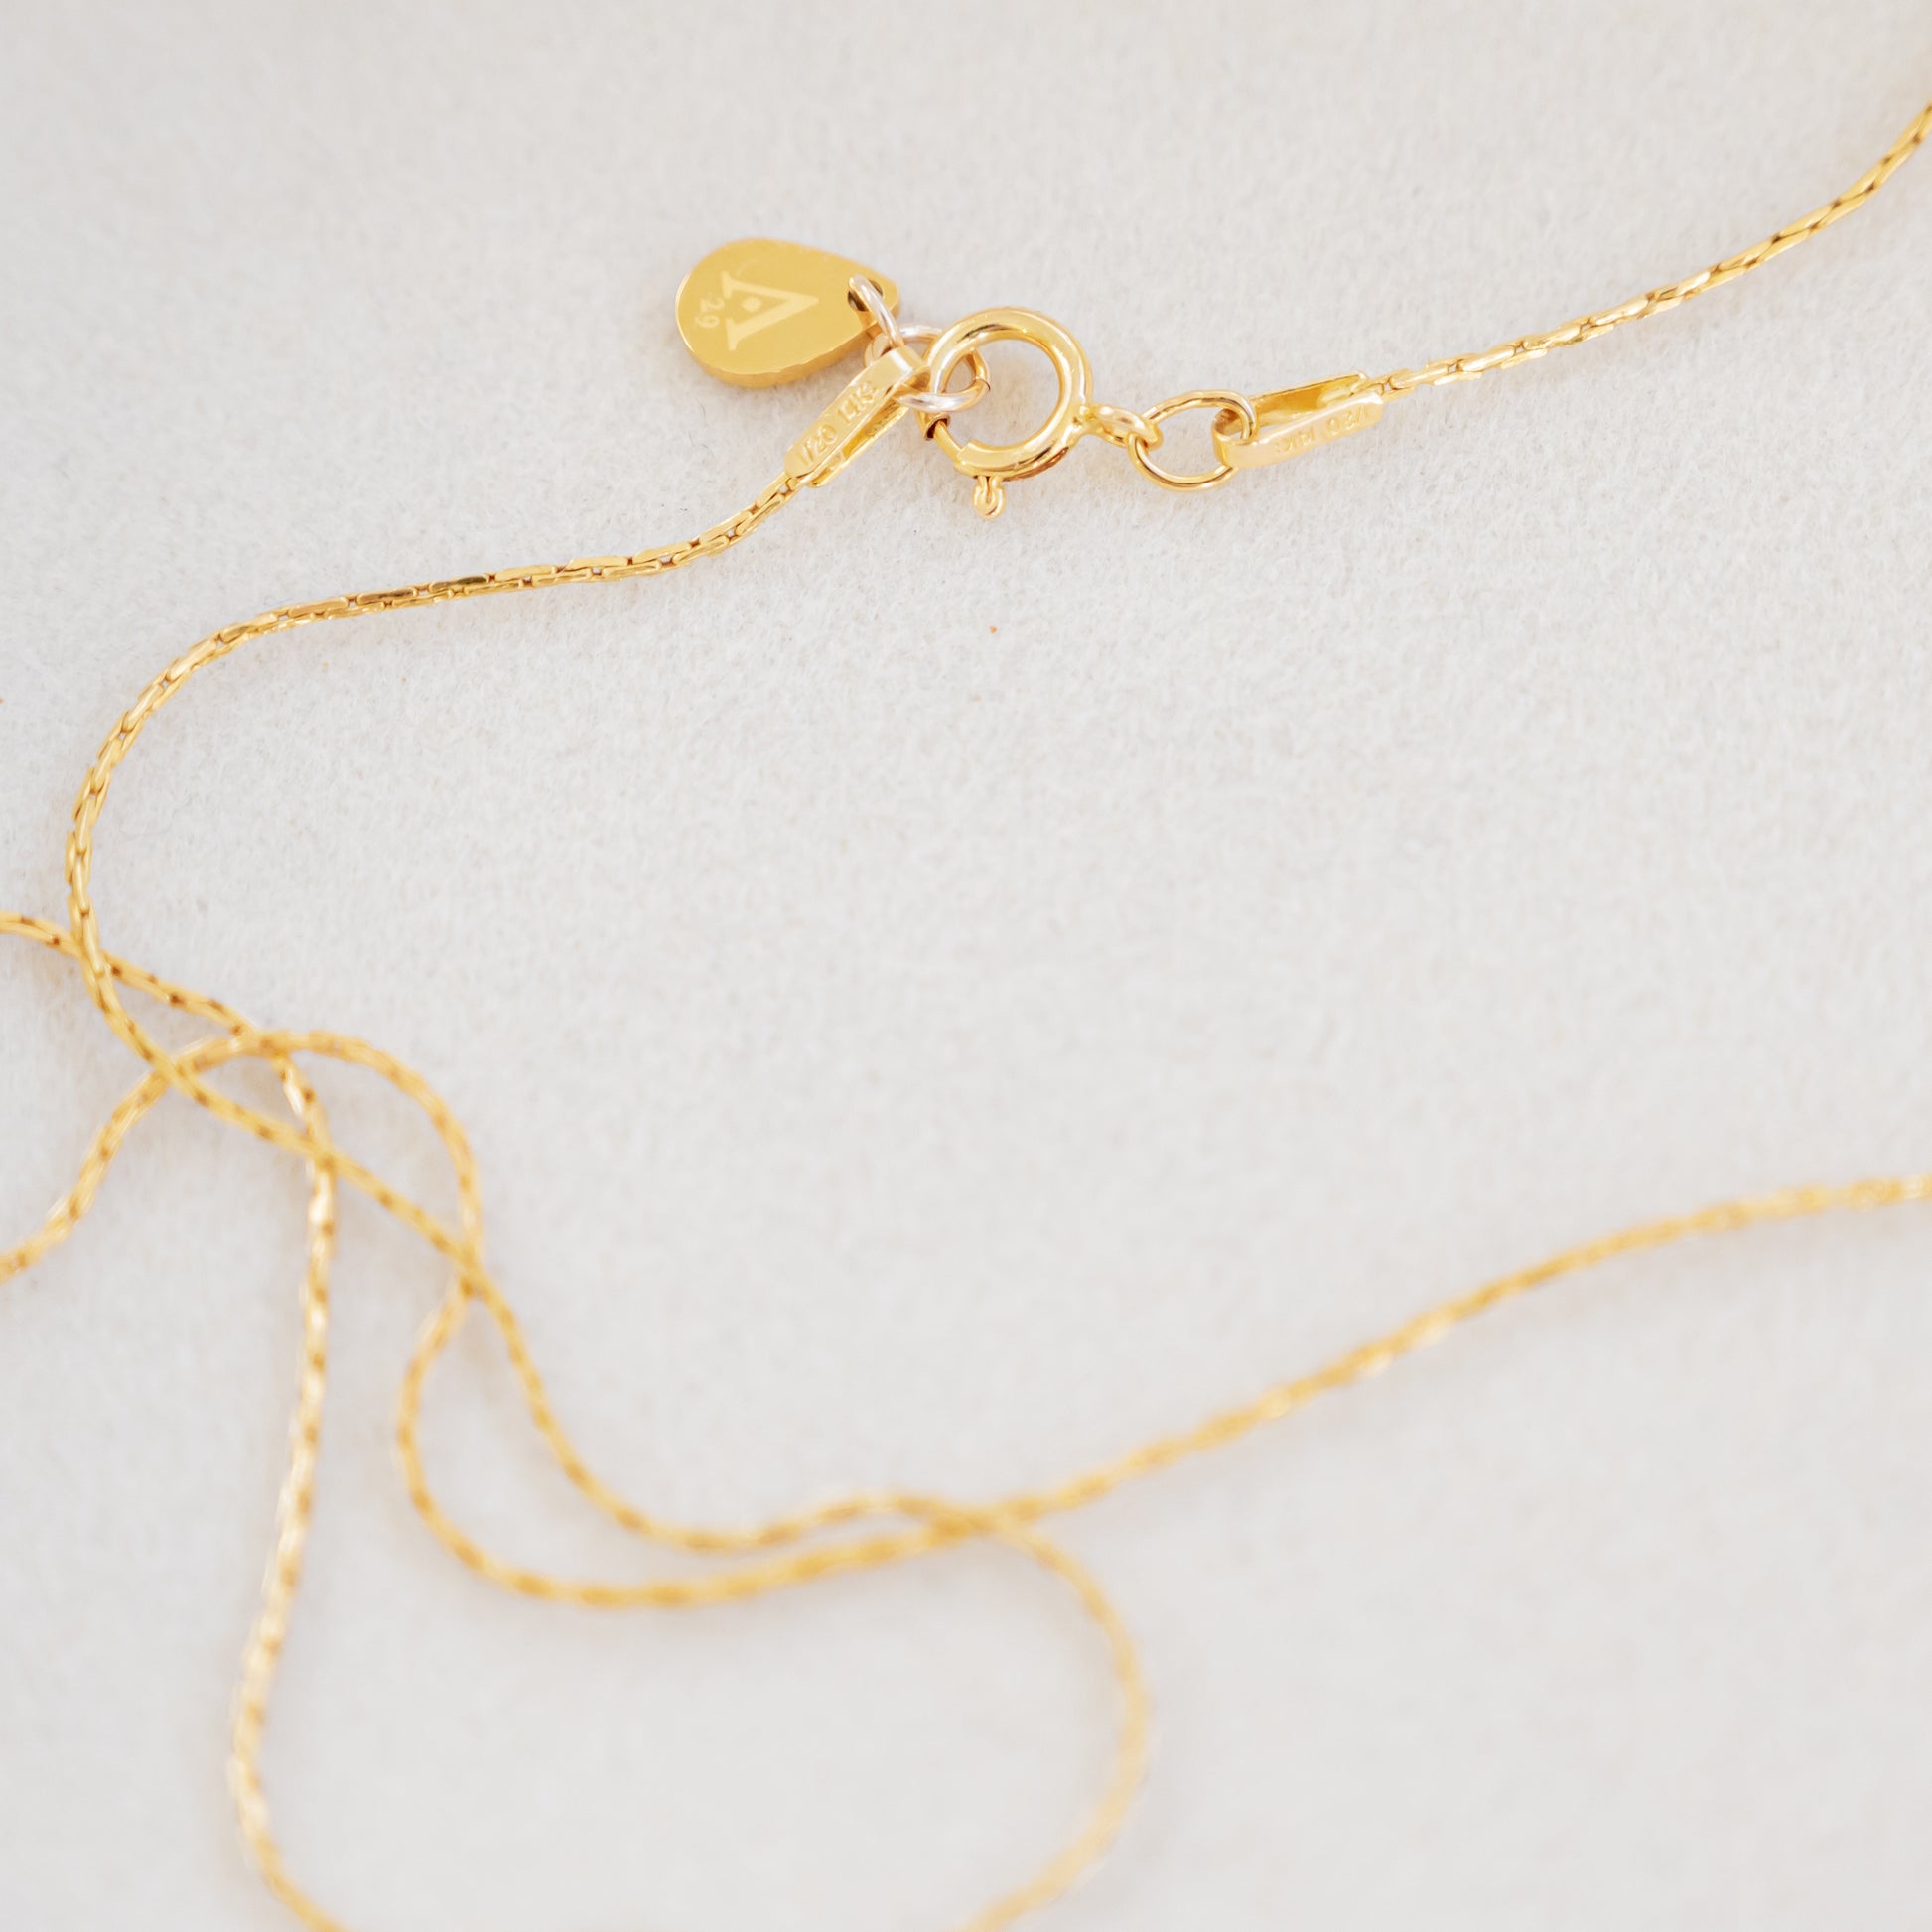 gold shell pendant necklace